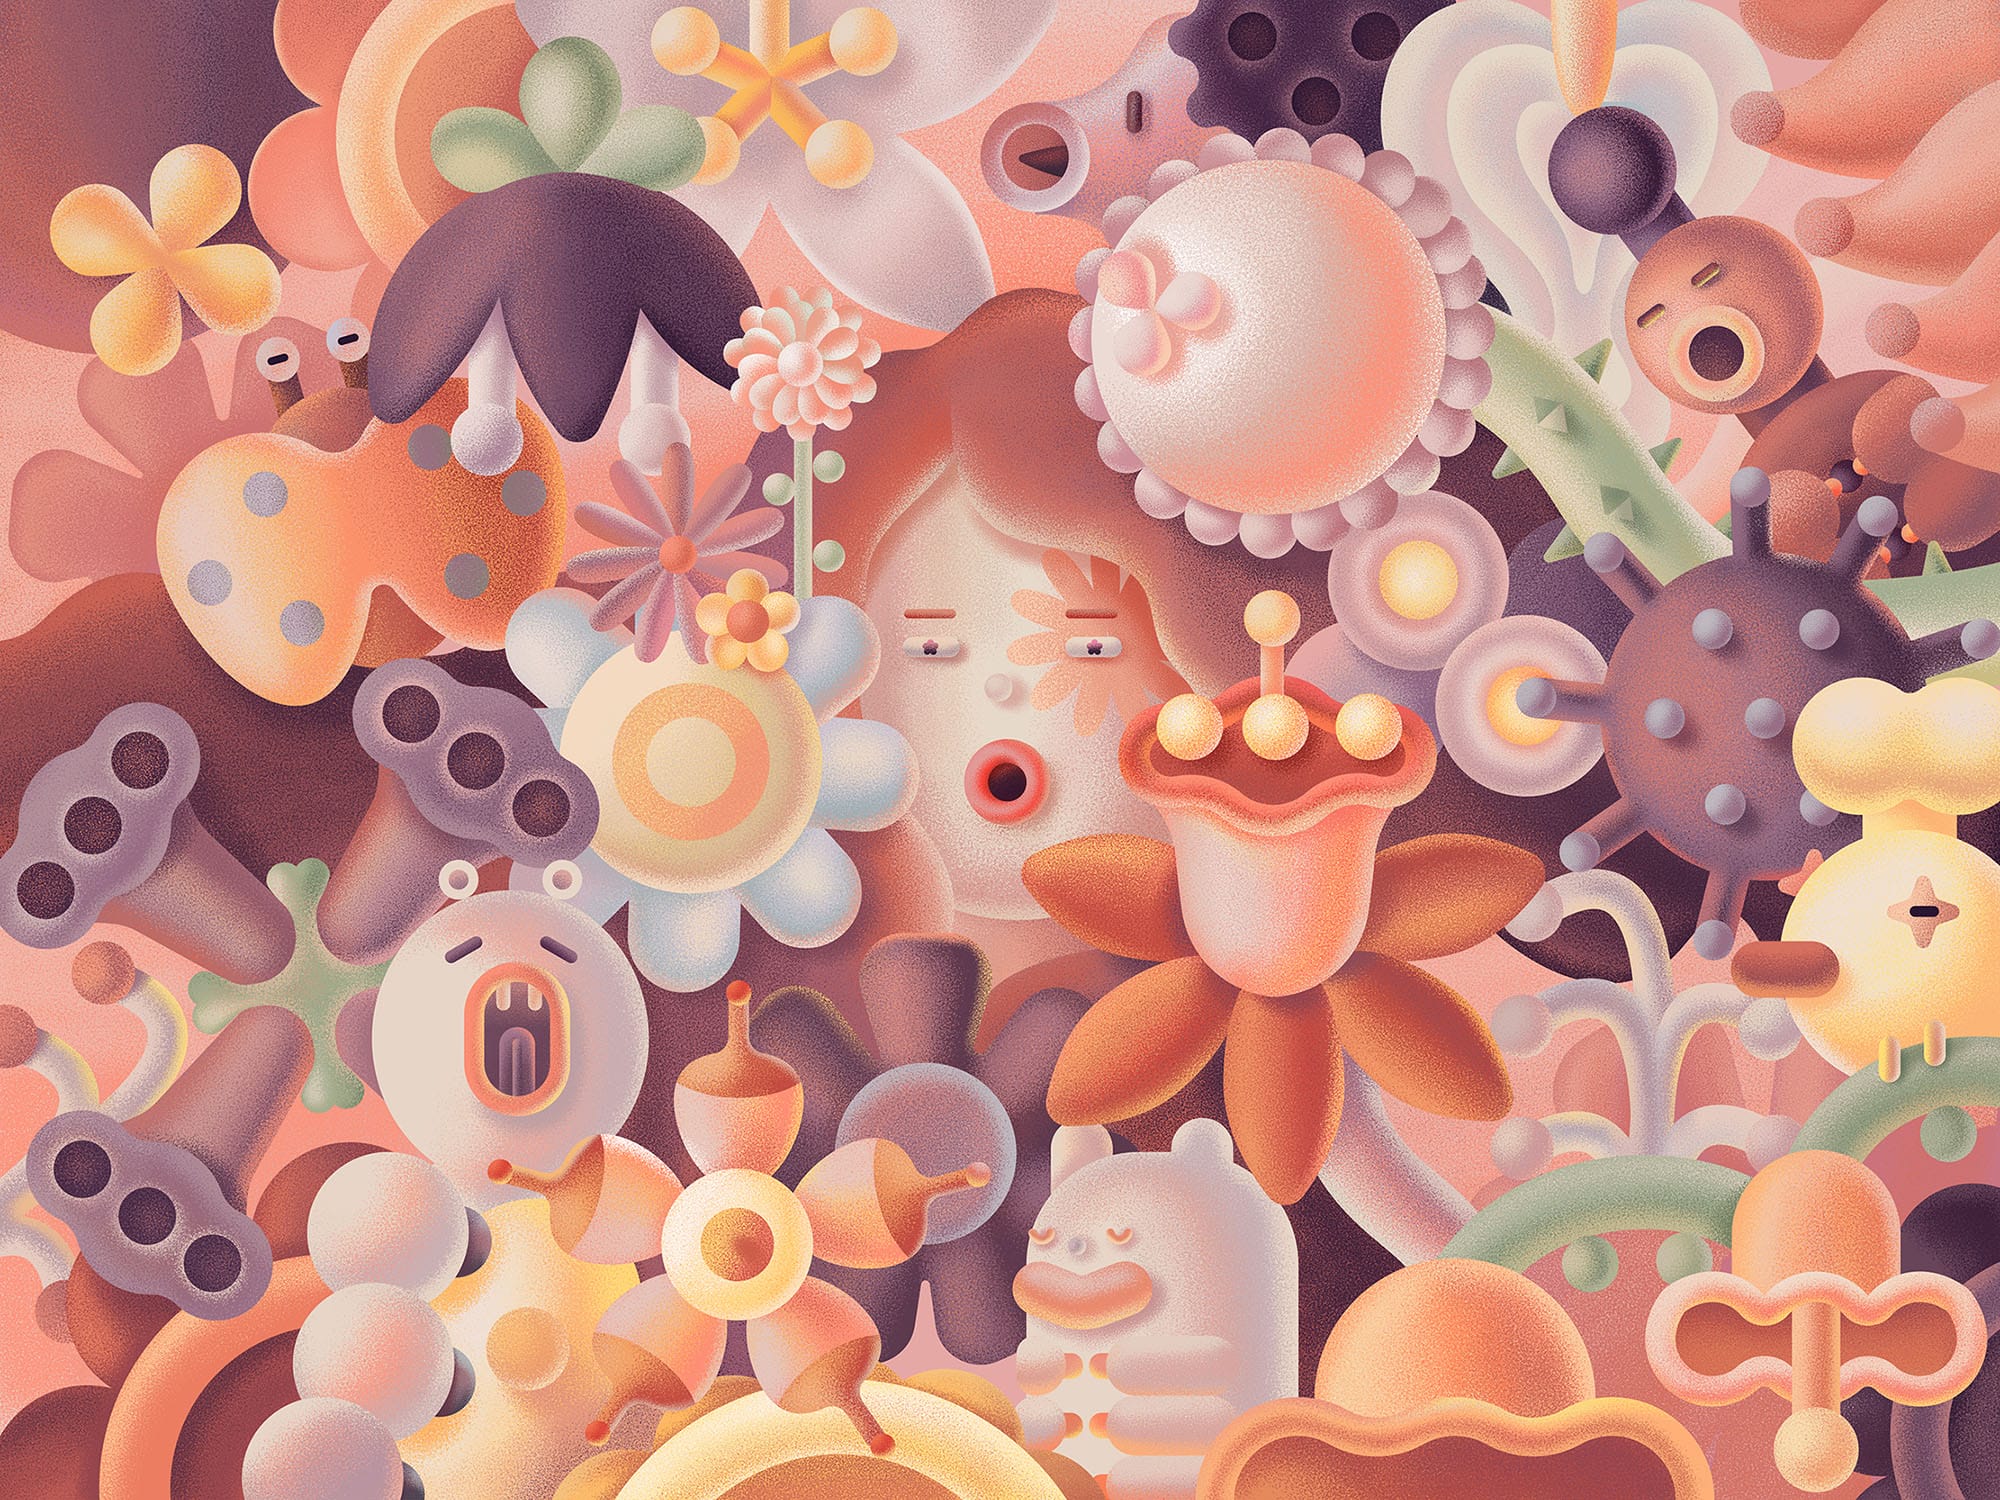 a woman's face is surrounded by a abundance of flowers. some flowers are patterned and have faces.